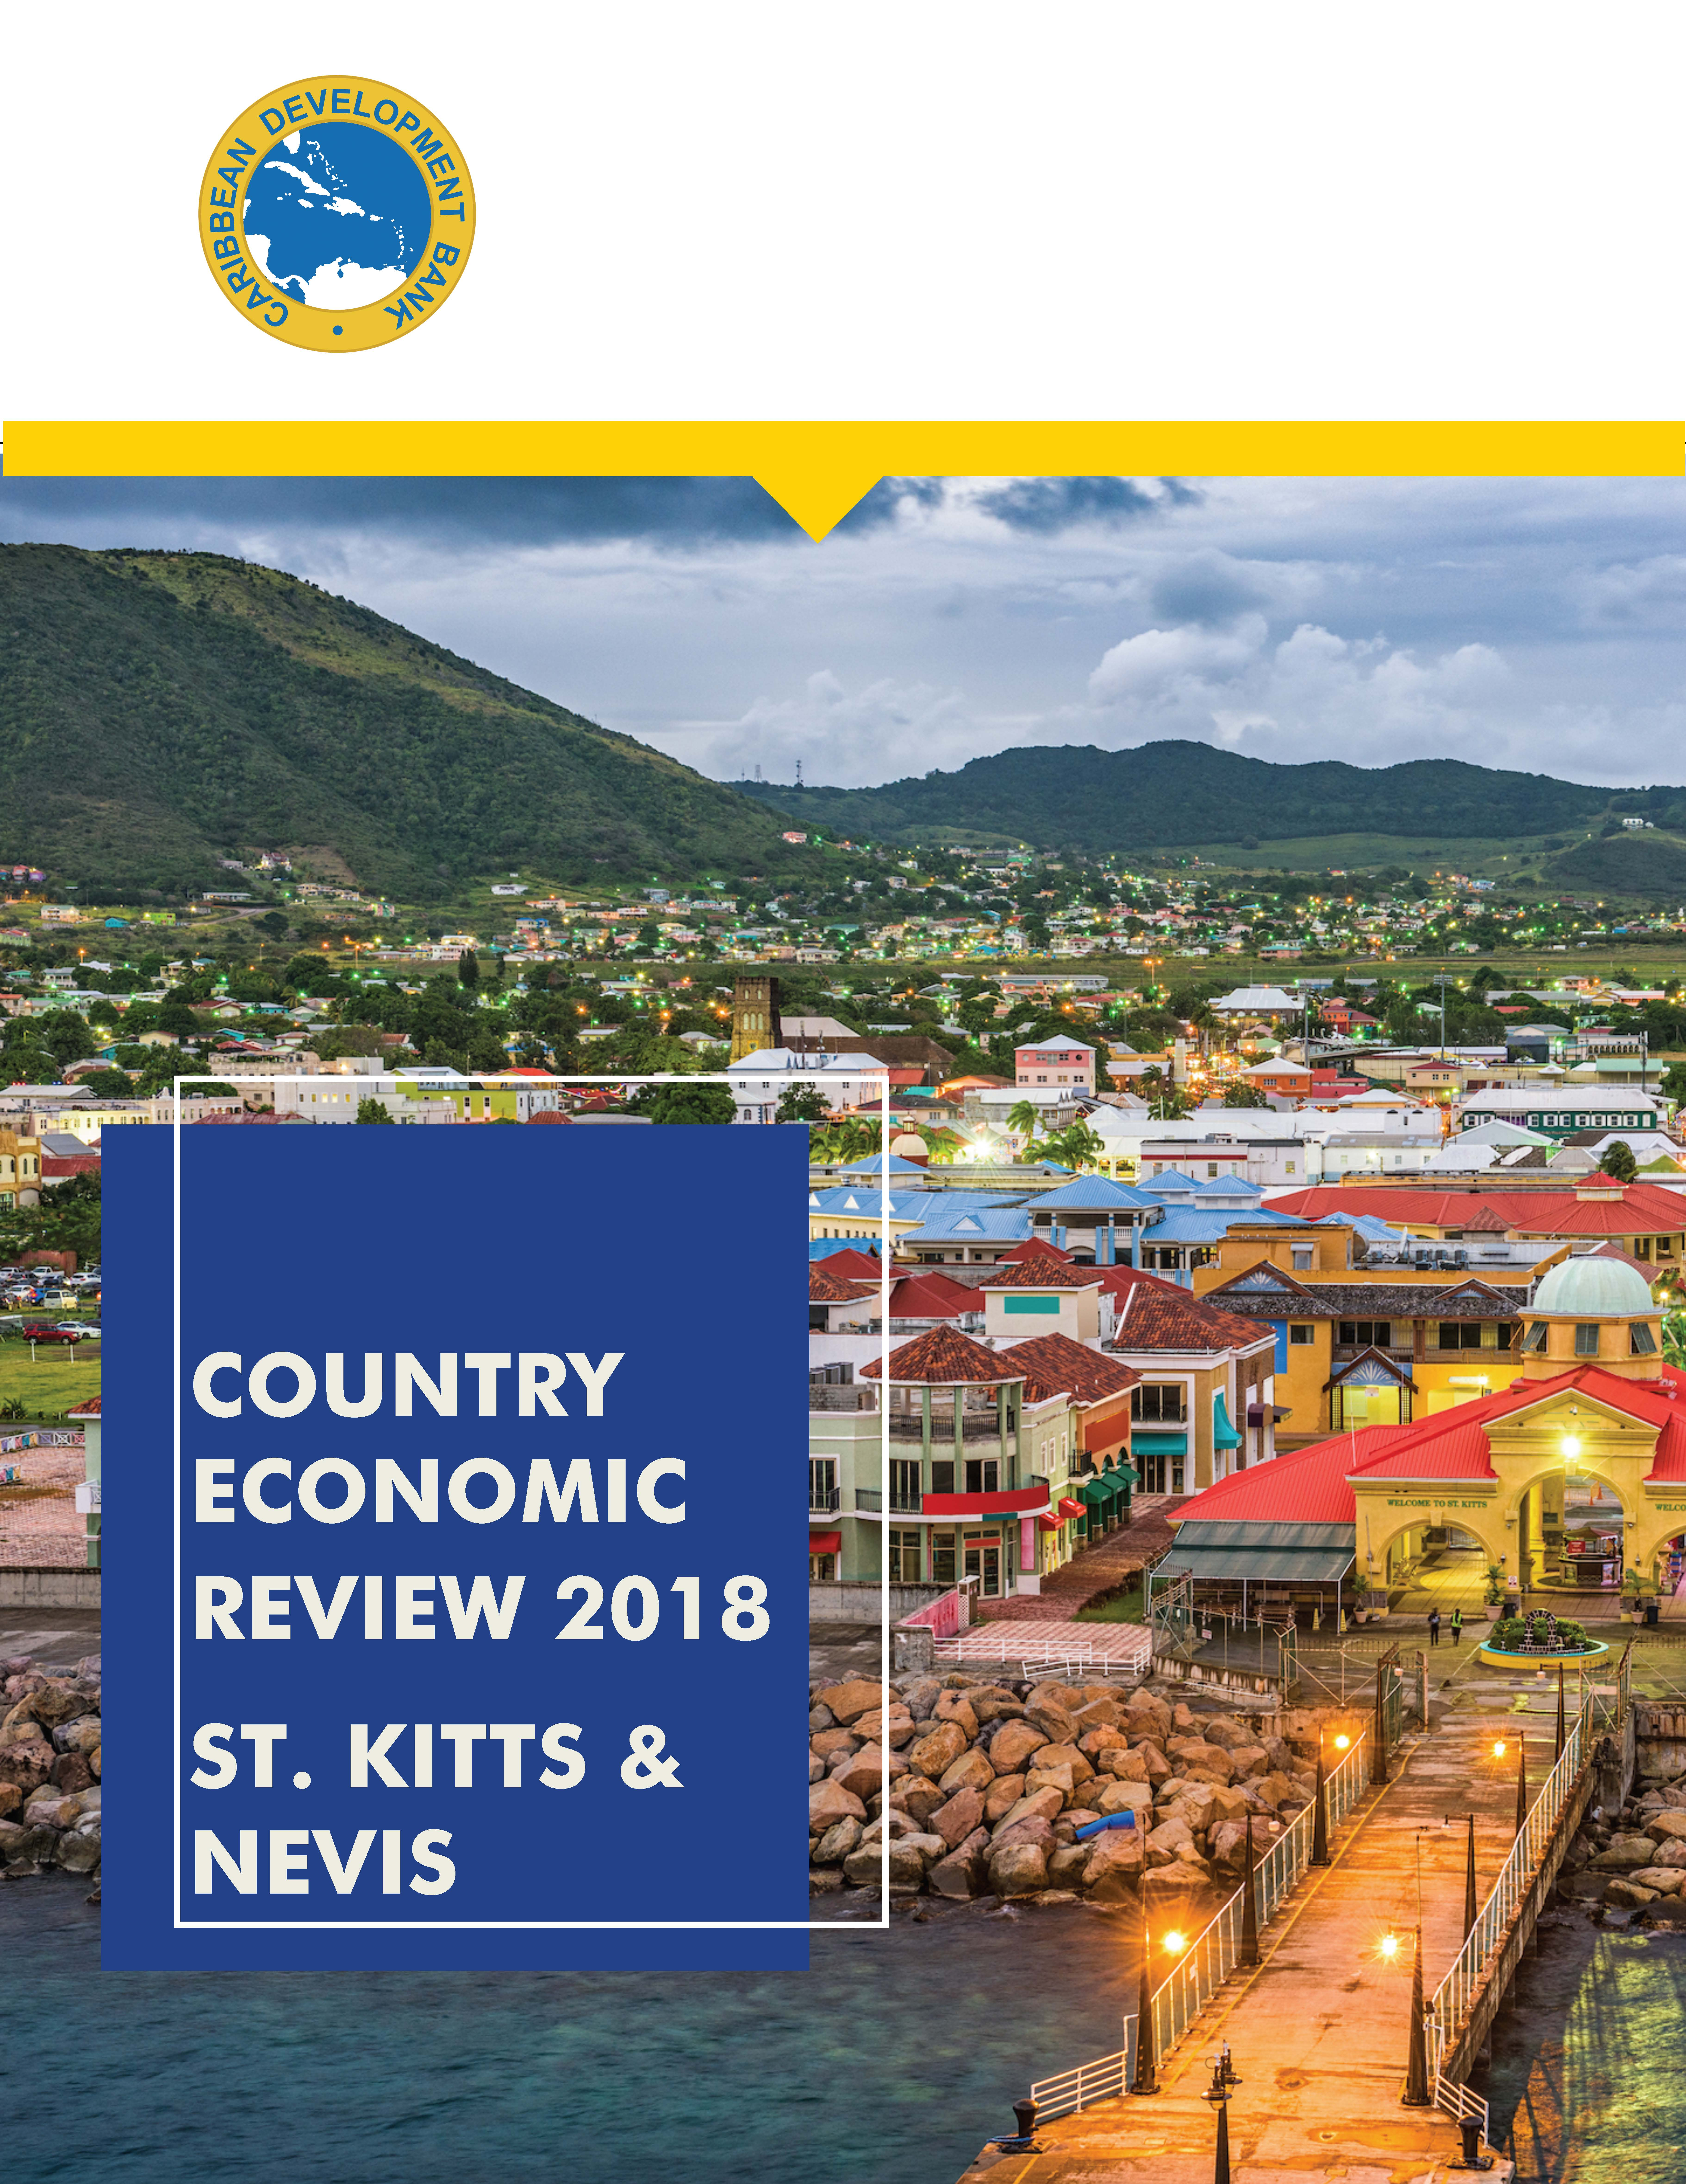 cover of 2018 Economic Review for St. Kitts and Nevis showing a view of the town Basseterre's skyline from the port